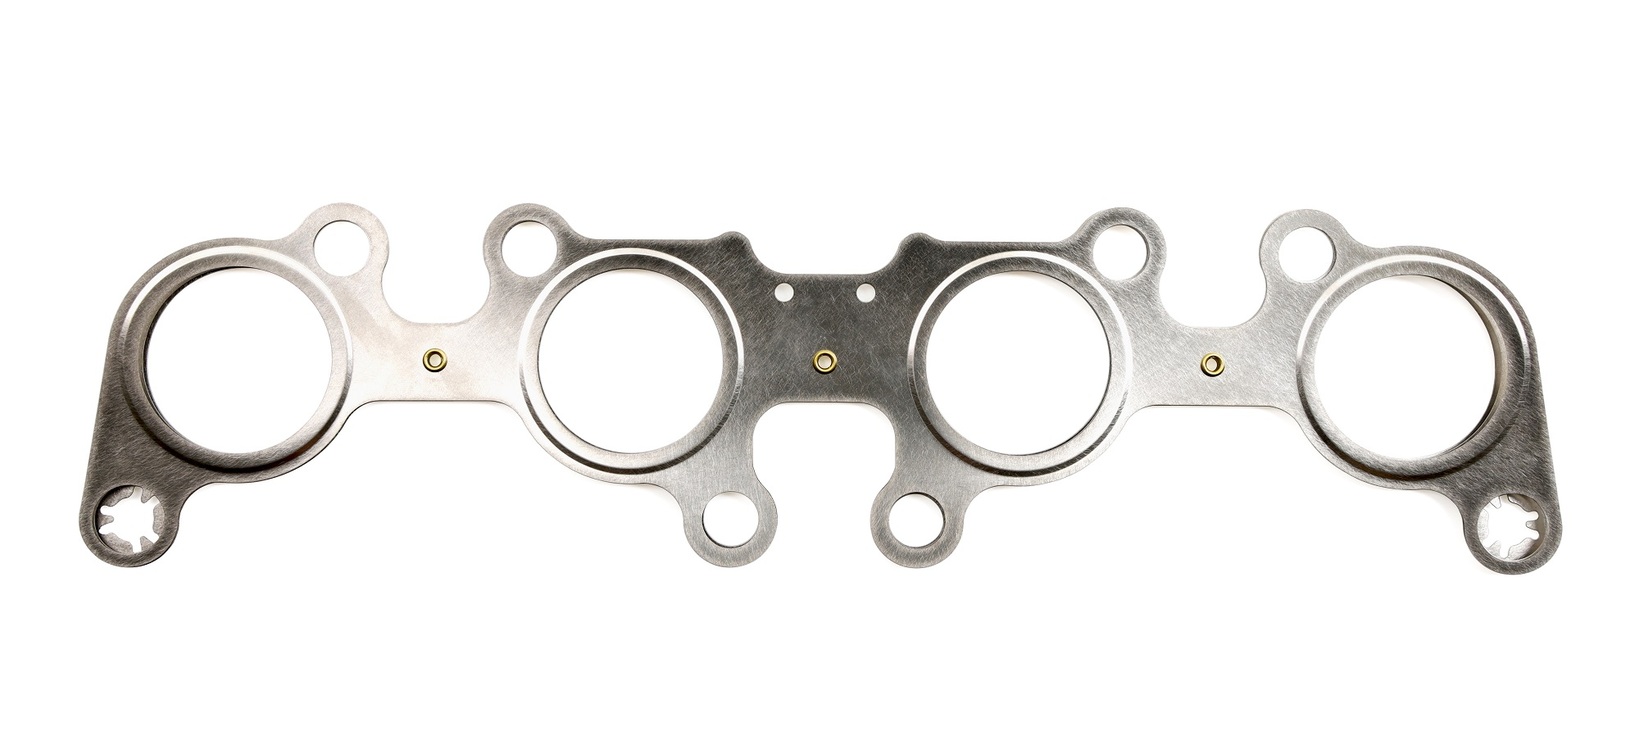 Cometic Product Release: Ford 5.2L Voodoo V8 MLS Exhaust Manifold Gasket Set